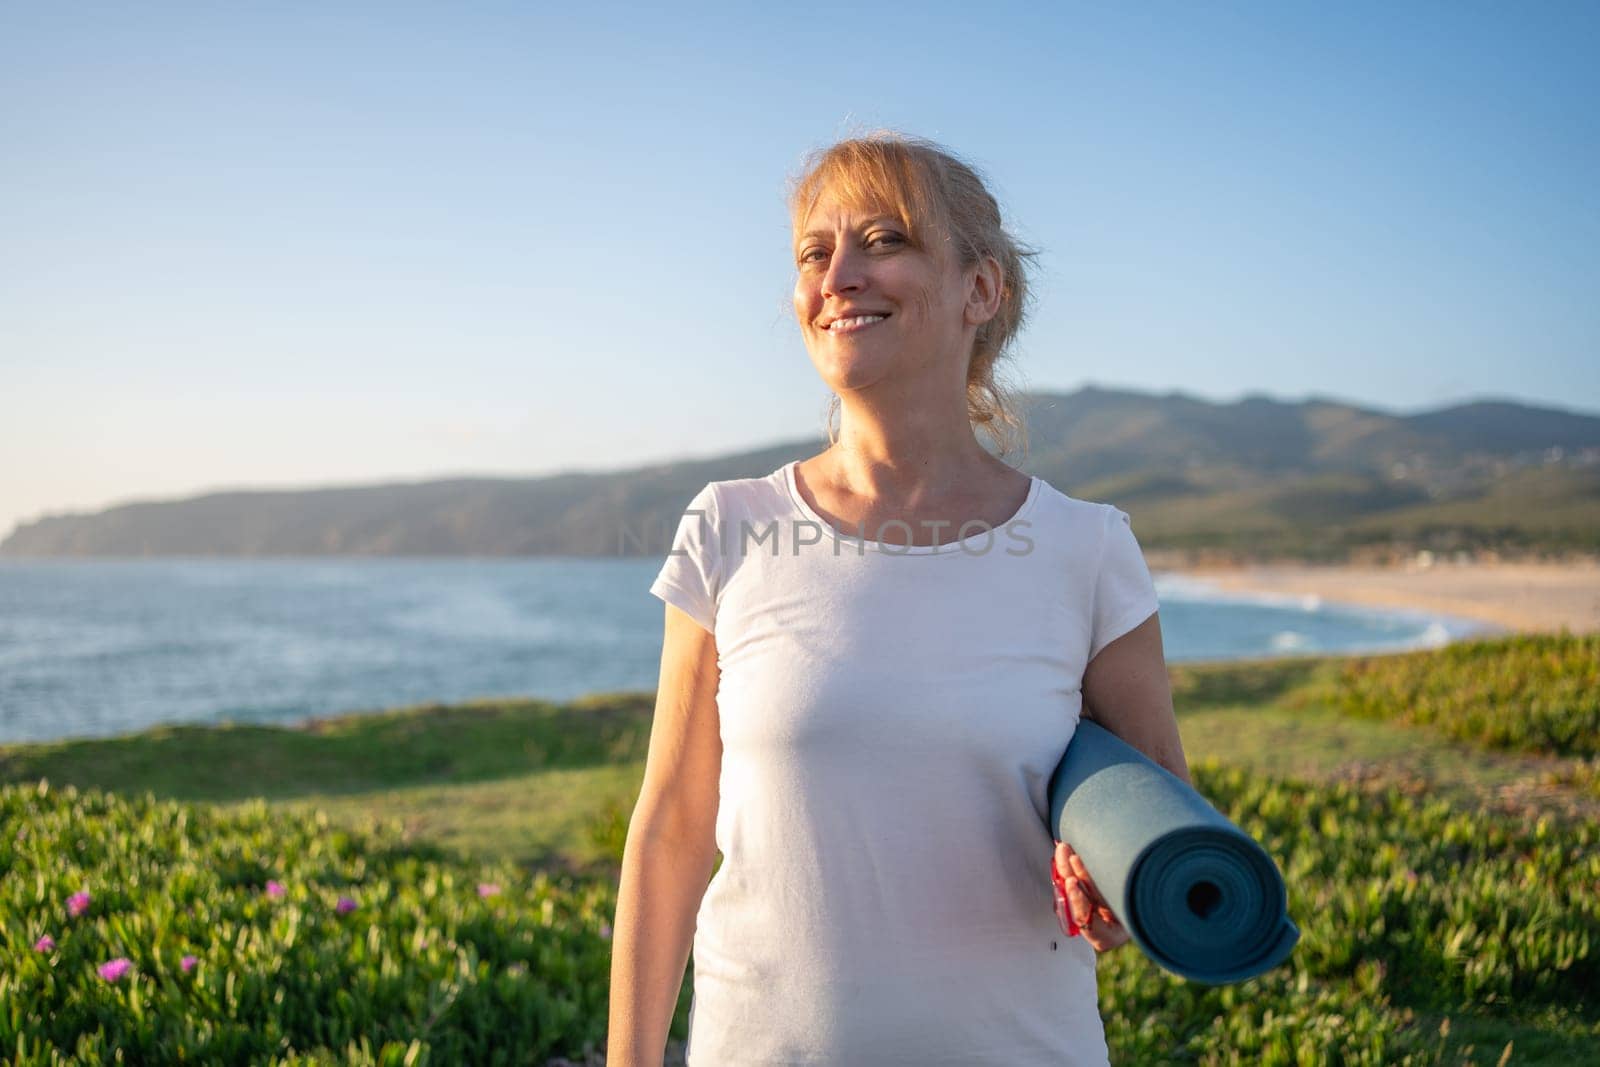 Elderly Caucasian lady holding yoga mat smiling on beach. Getting ready for morning yoga session on ocean shore, promoting healthy lifestyle and idea of enjoying retirement on vacation